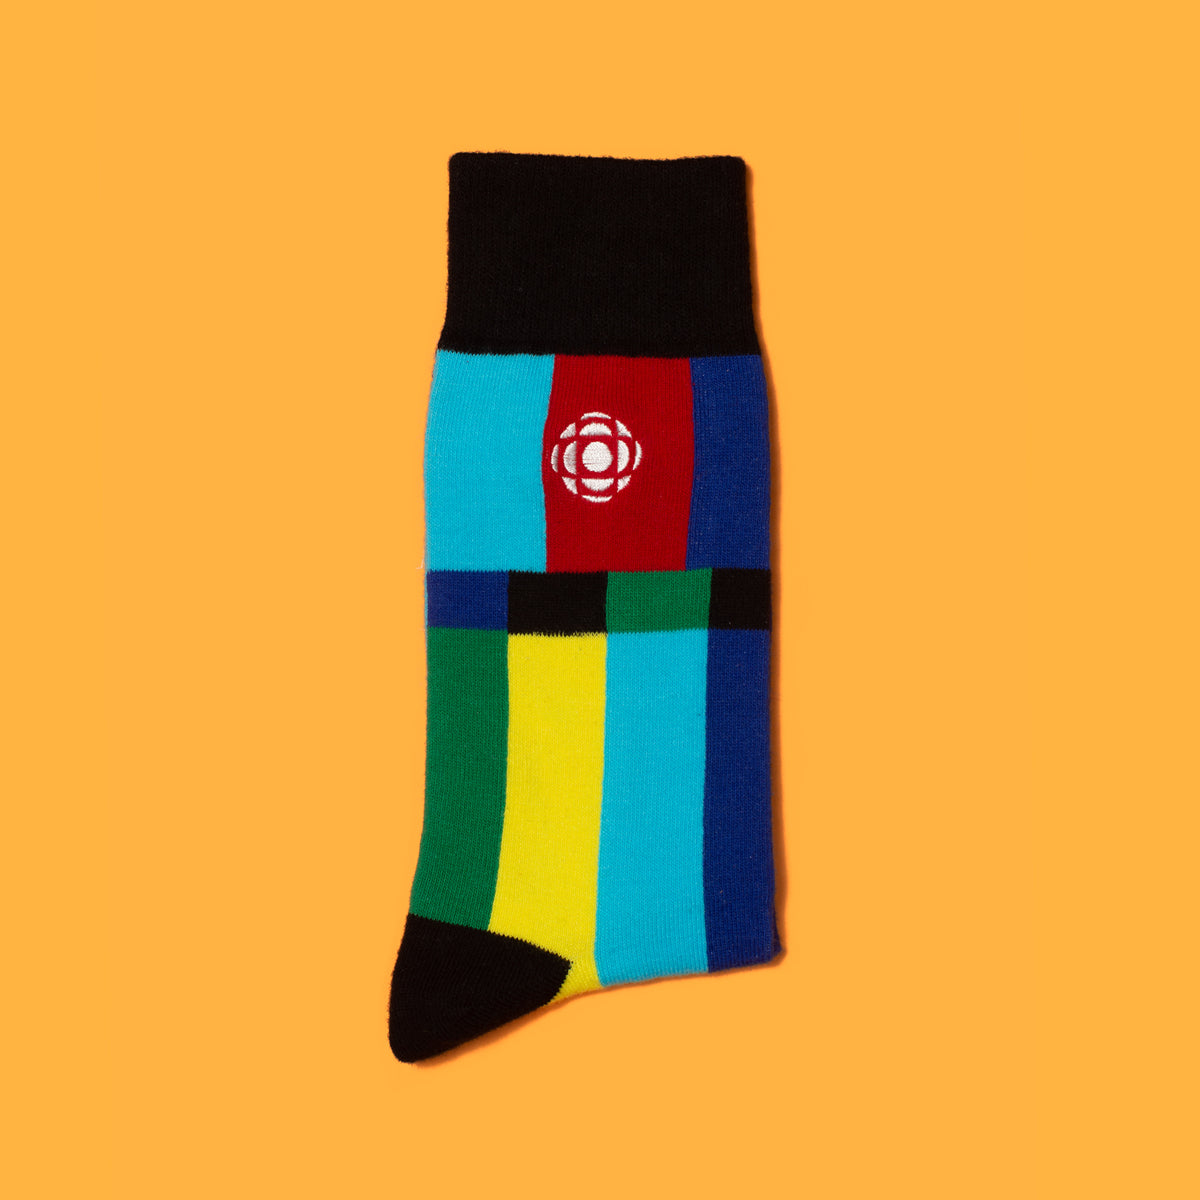 CBC Standby Socks - Main and Local